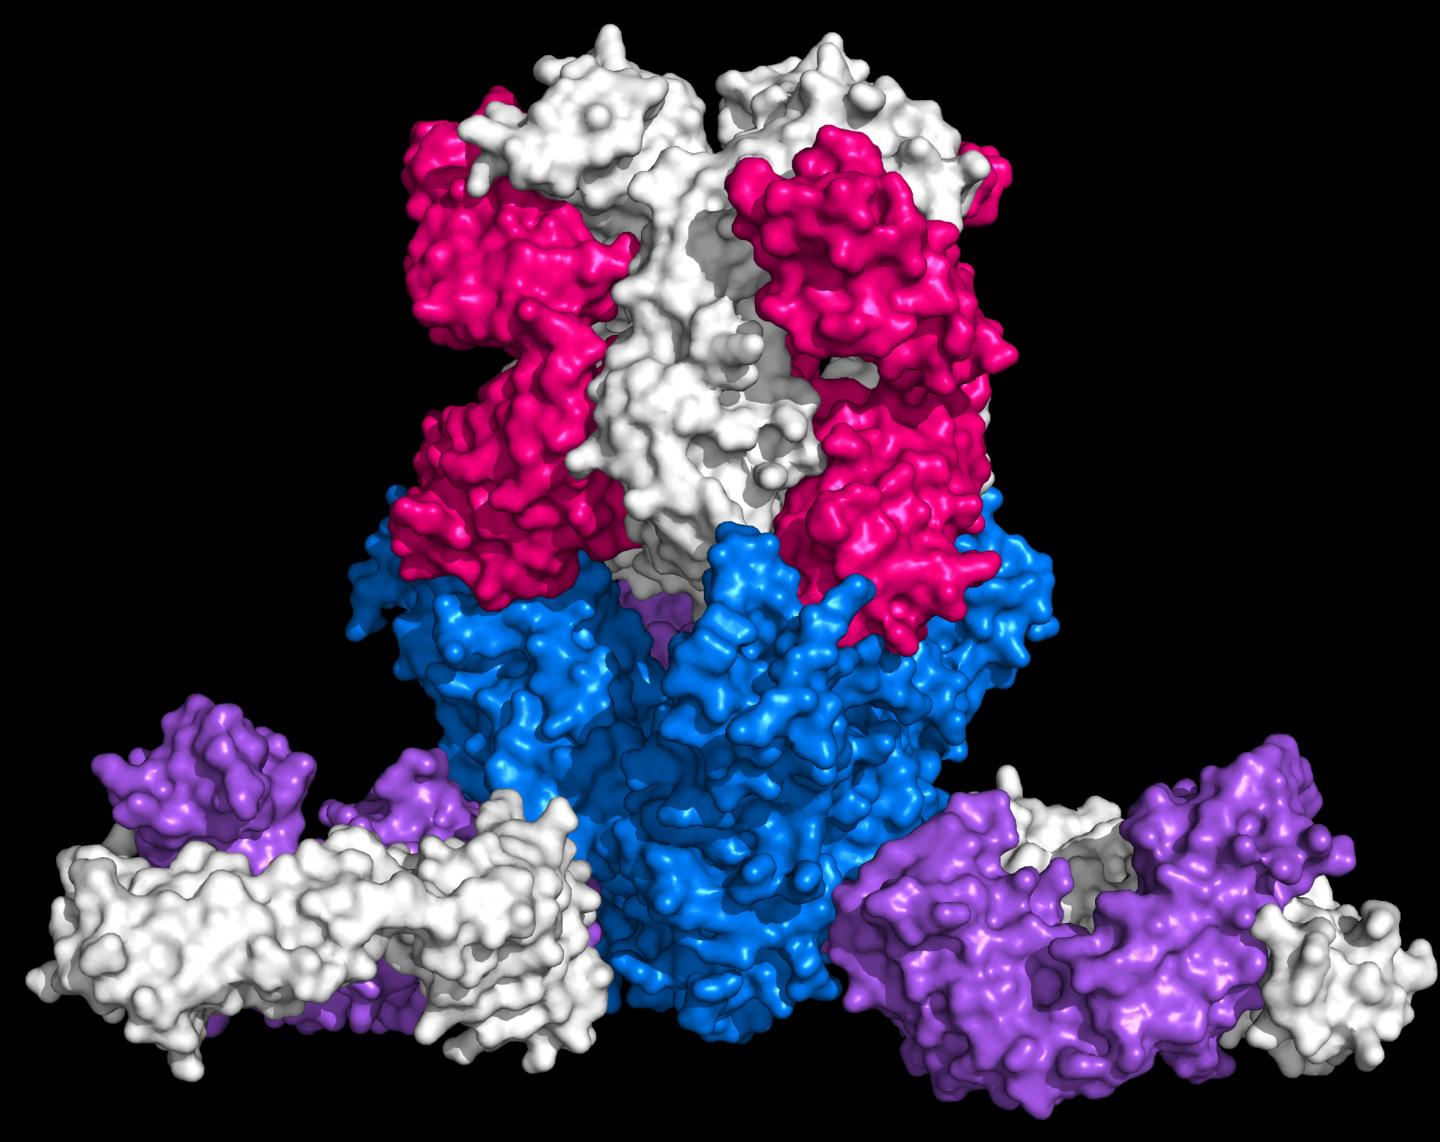 Ebola Glycoprotein Bound by Protective Antibodies mAb114 and mAb100